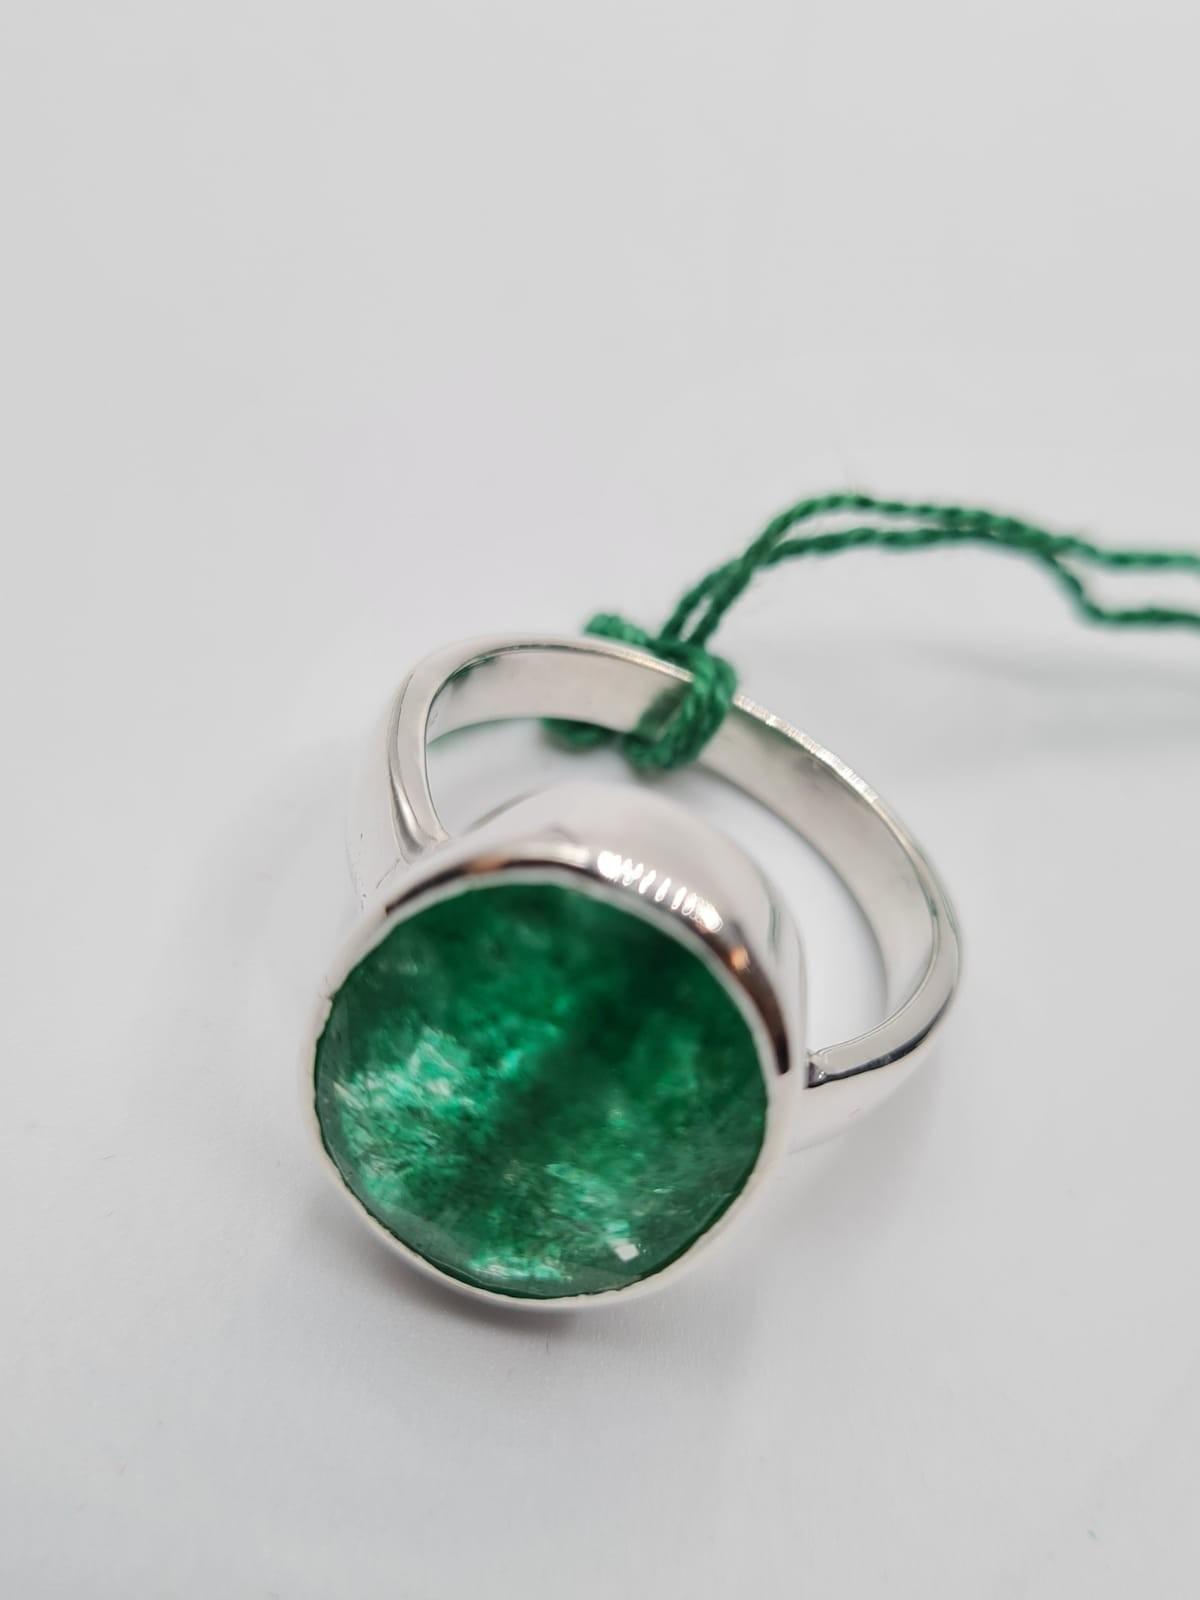 12.66ct emerald stone ring in 925 silver - Image 2 of 3